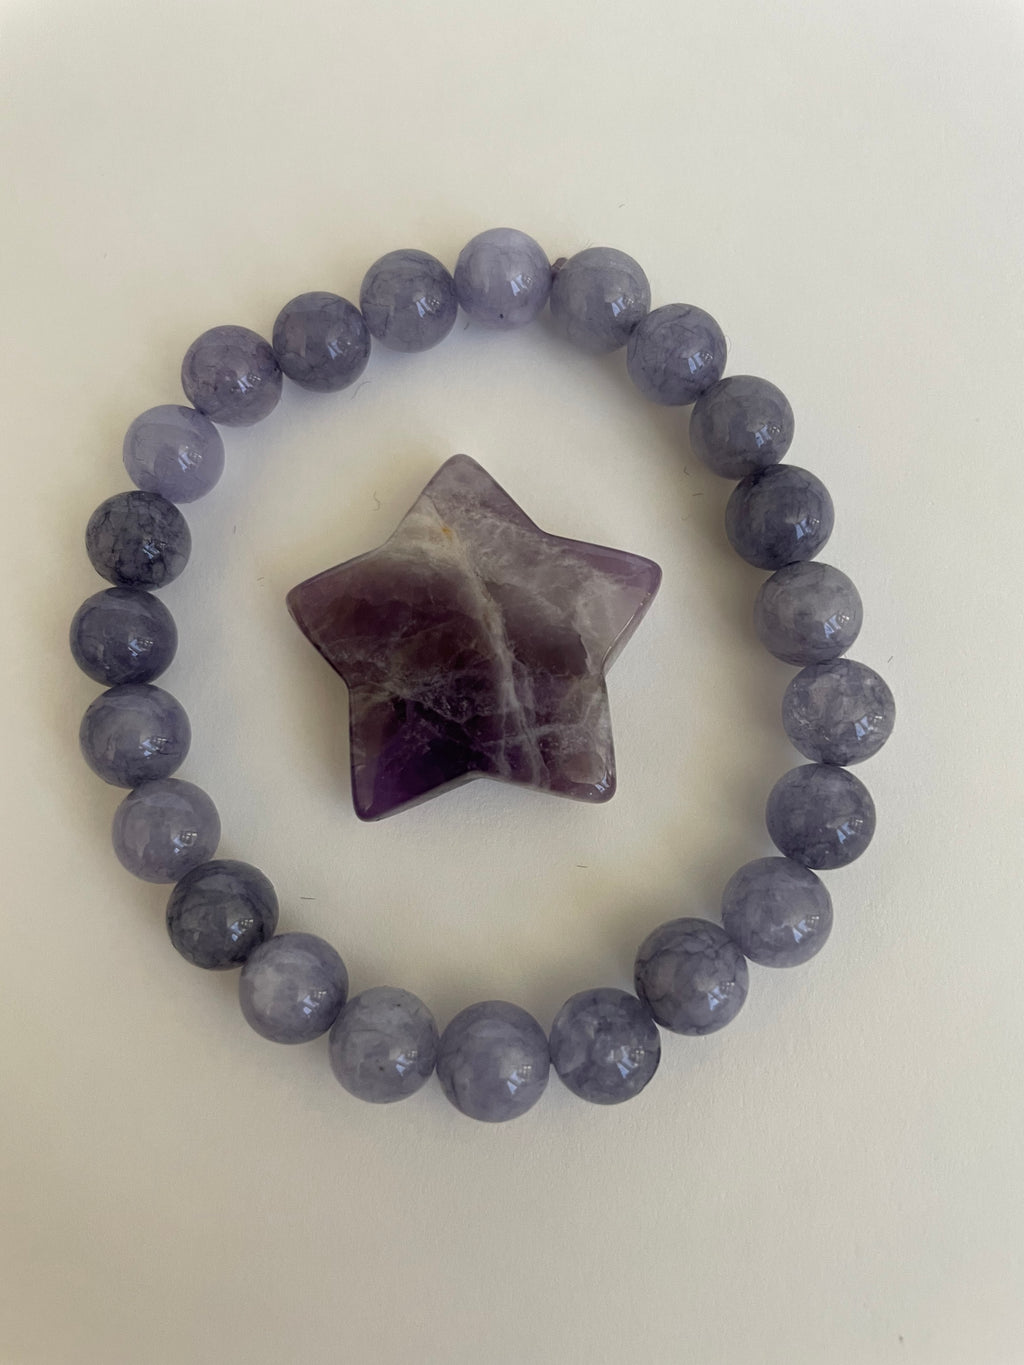 This chevron amethyst star can be used for meditation, healing, for your altar or as décor for any room in your home or office. Easy to slip right into your pocket so you have the energy of amethyst everywhere you go! Approximately 1¼". Cost is $6.